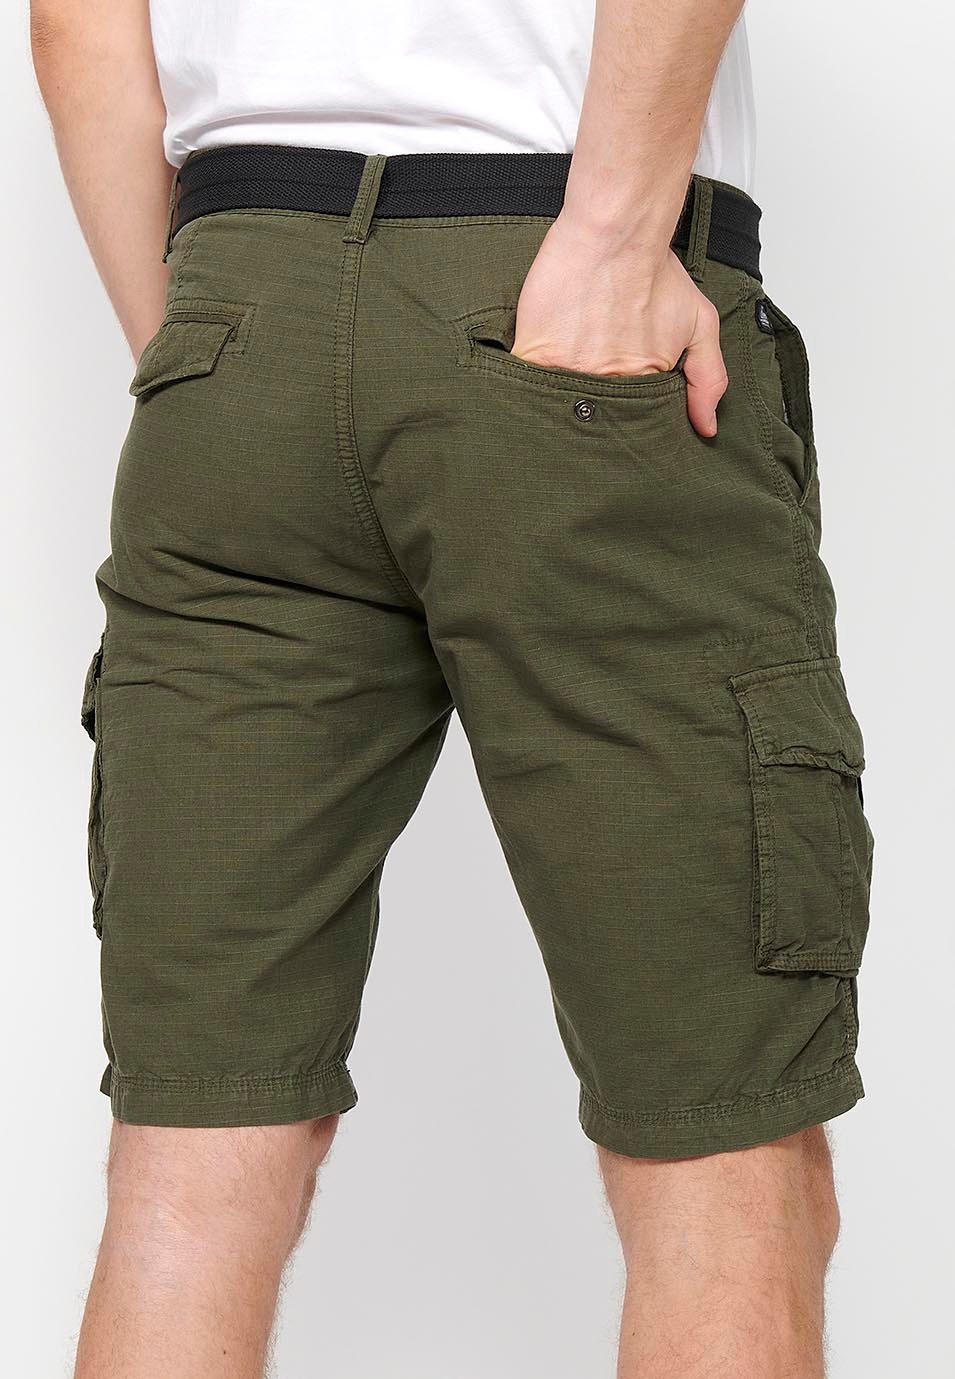 Cotton cargo shorts with belt and front closure with zipper and button with pockets, two back pockets with flap and two green cargo pants for Men 5